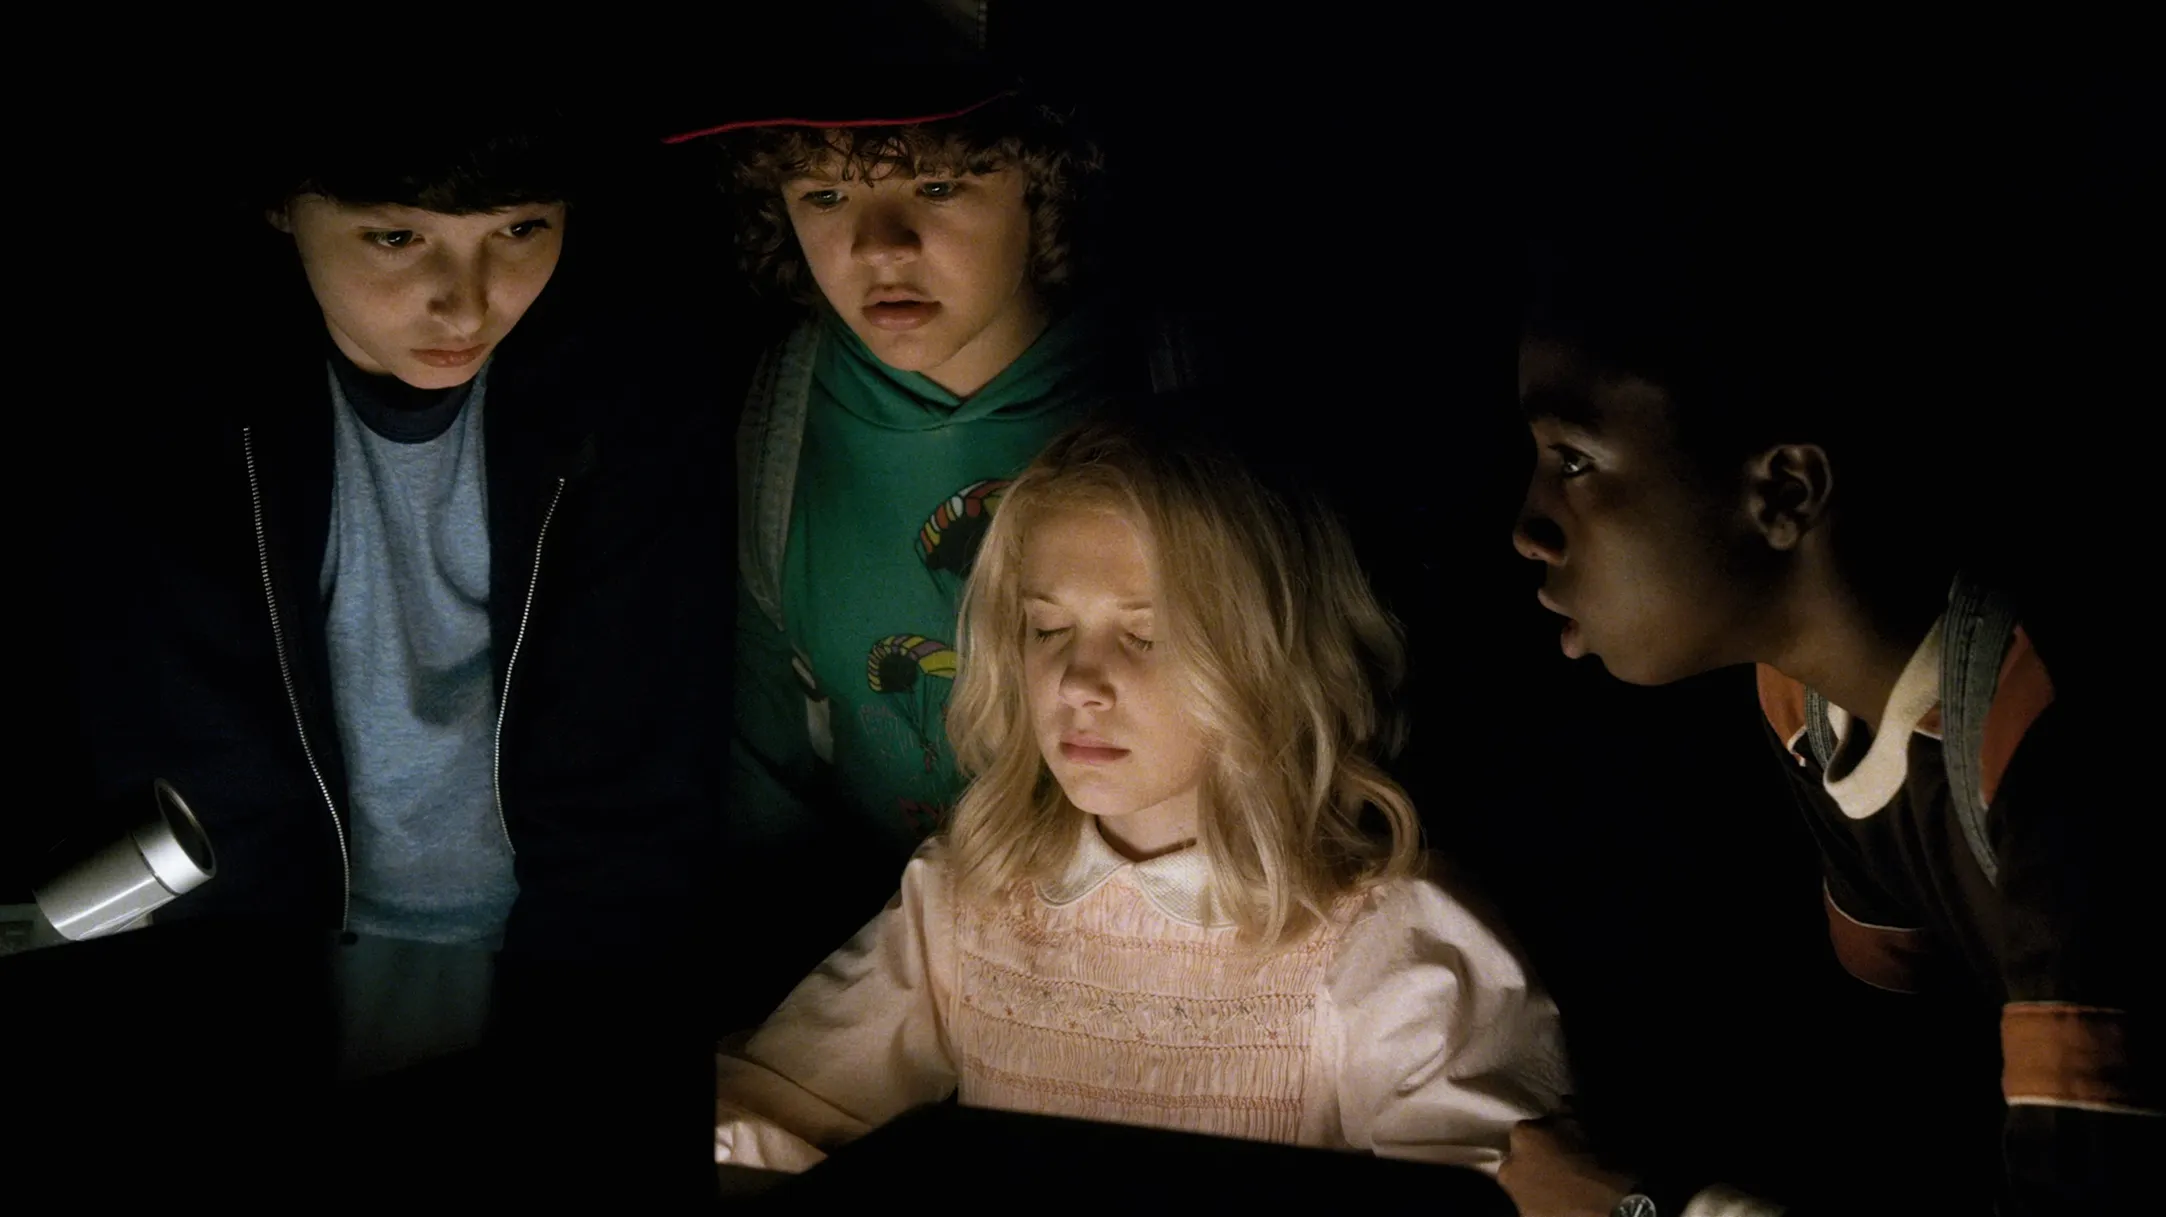 The Best 'Stranger Things' Conspiracy Theories